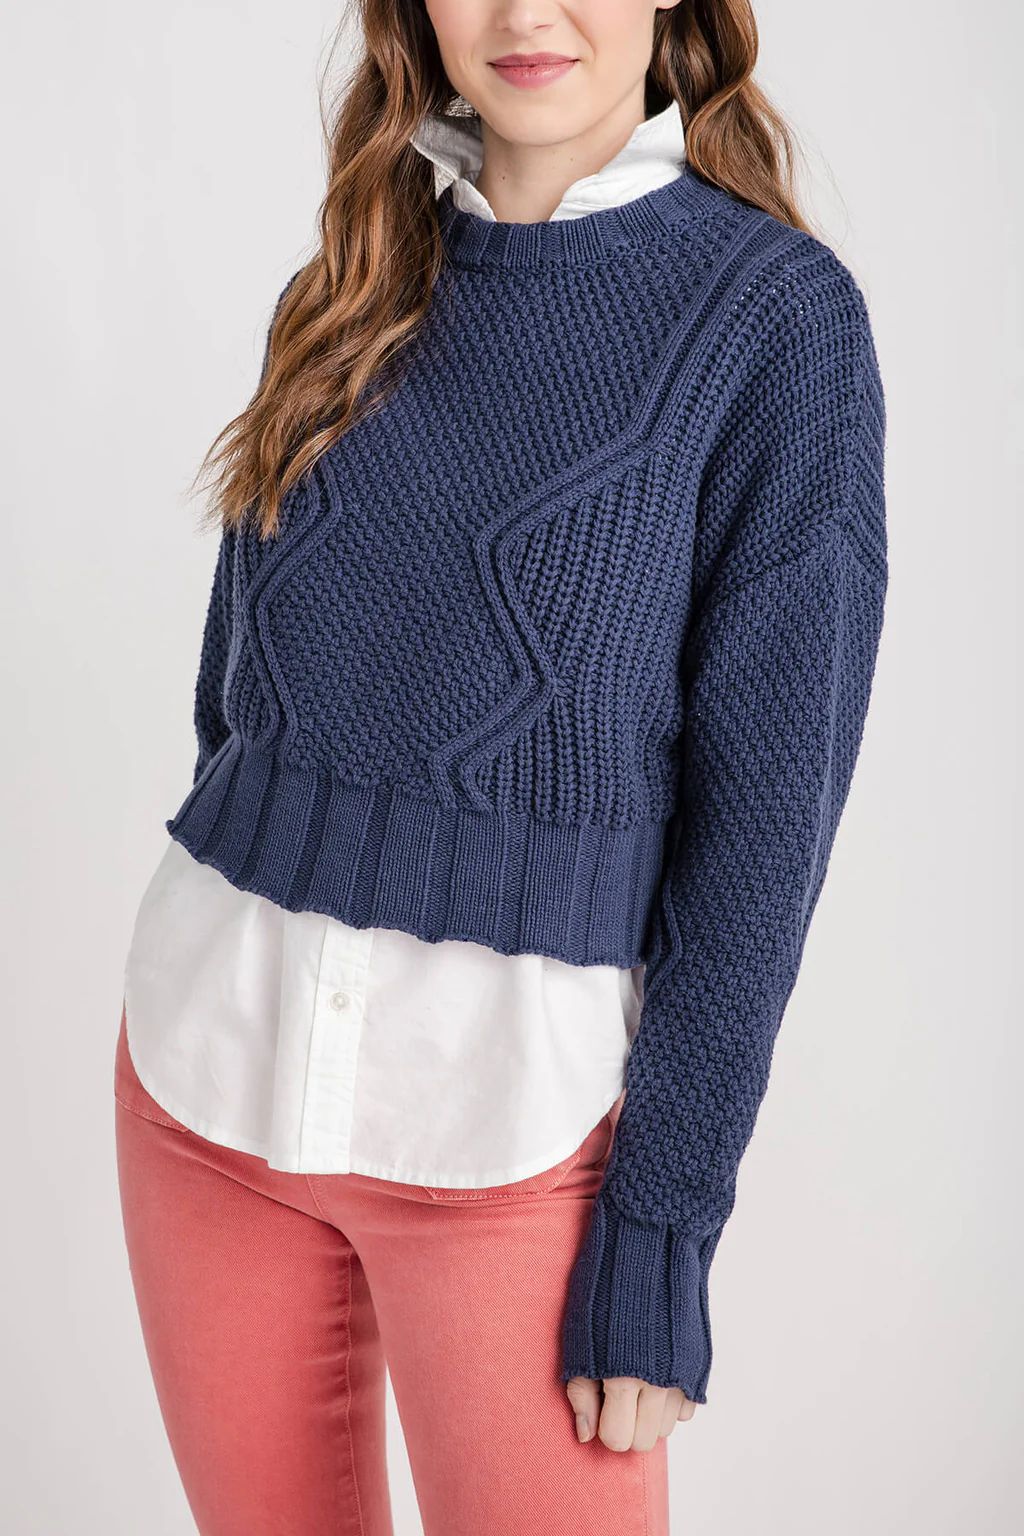 All Row Cotton Cable Sweater | Social Threads